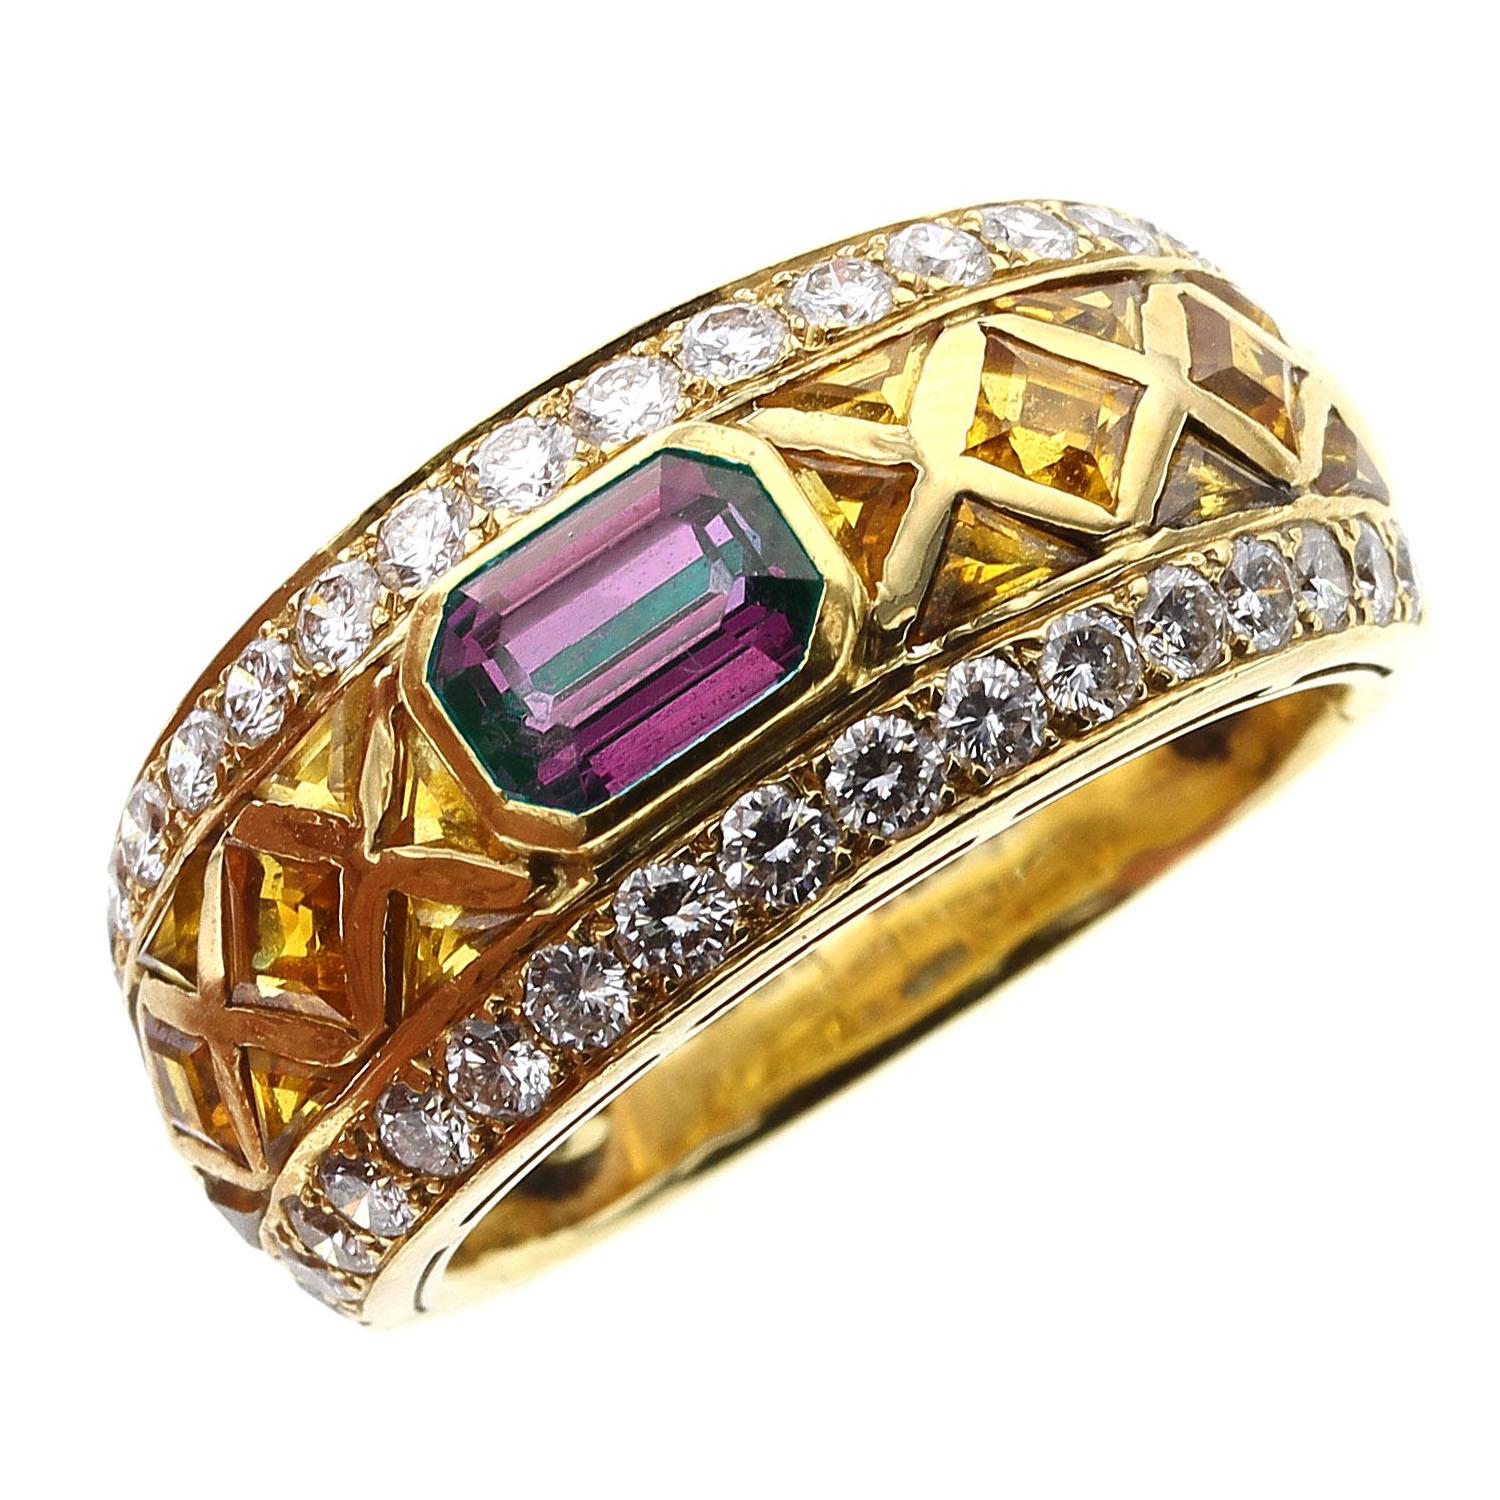 A beautifully crafted Alexandrite Ring accented with 18 citrines and 34 round diamonds. Ring Size US 6. Signed G & Co. with hallmarks.